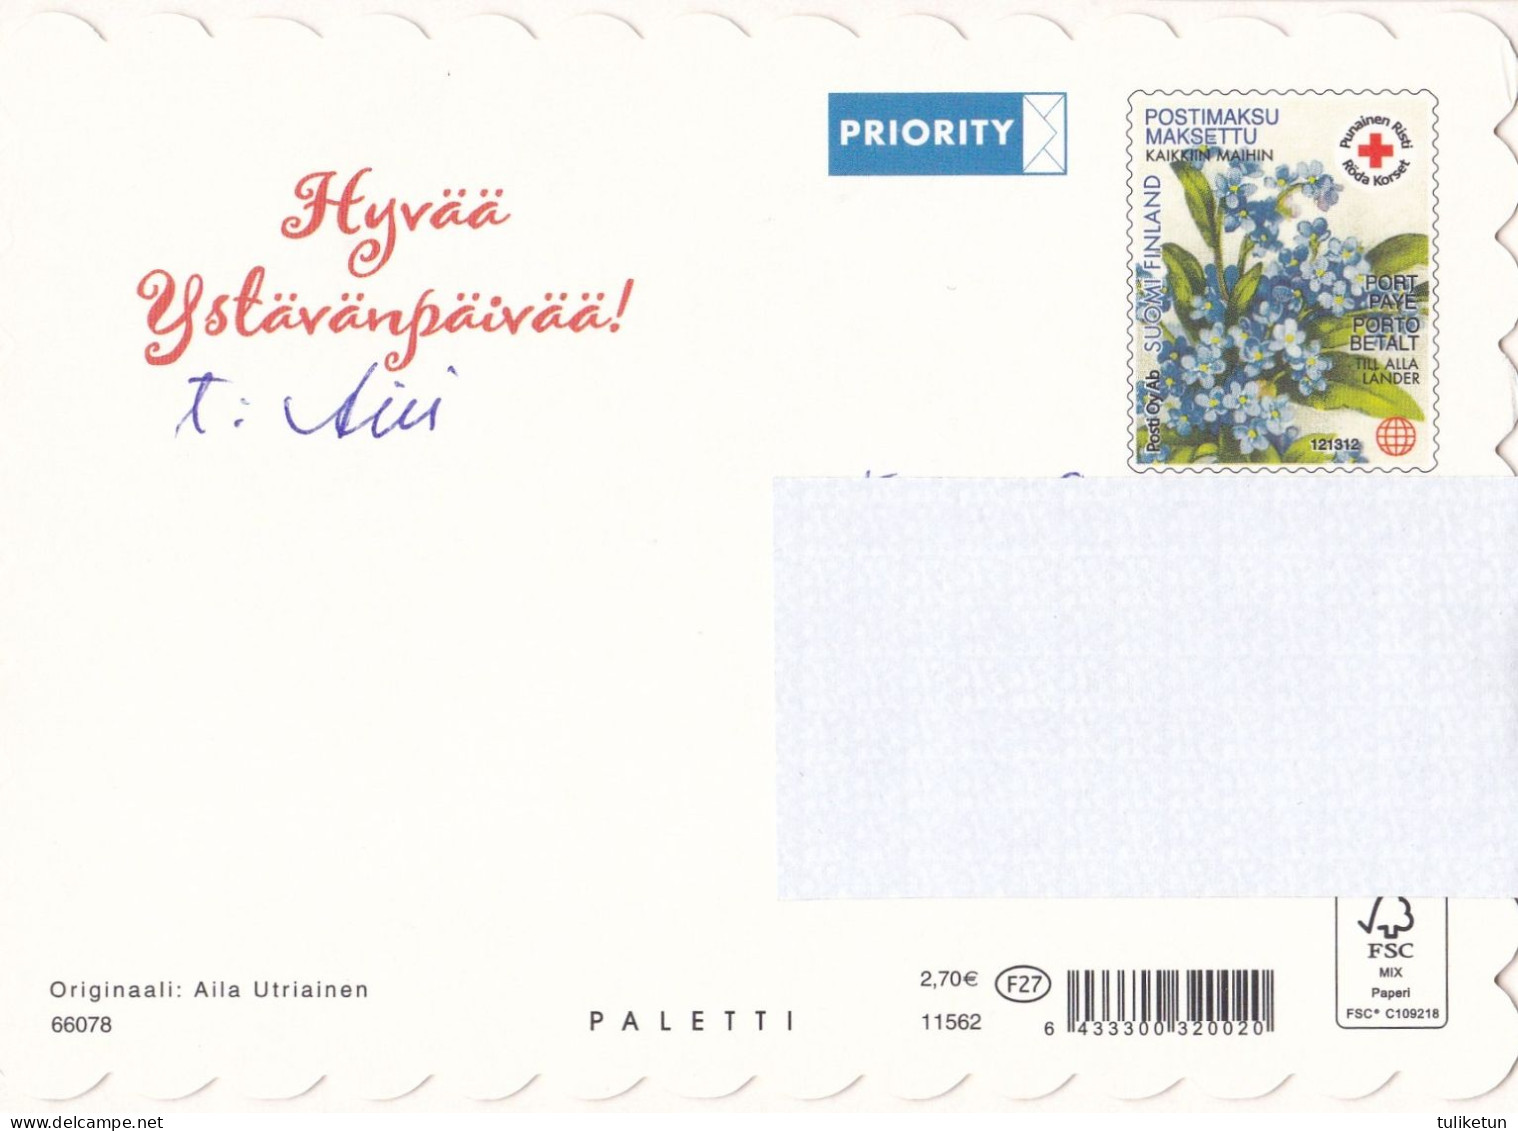 Postal Stationery - Valentine's Day - Teddy Bear Sitting With Roses - Red Cross - Suomi Finland - Postage Paid - Postal Stationery